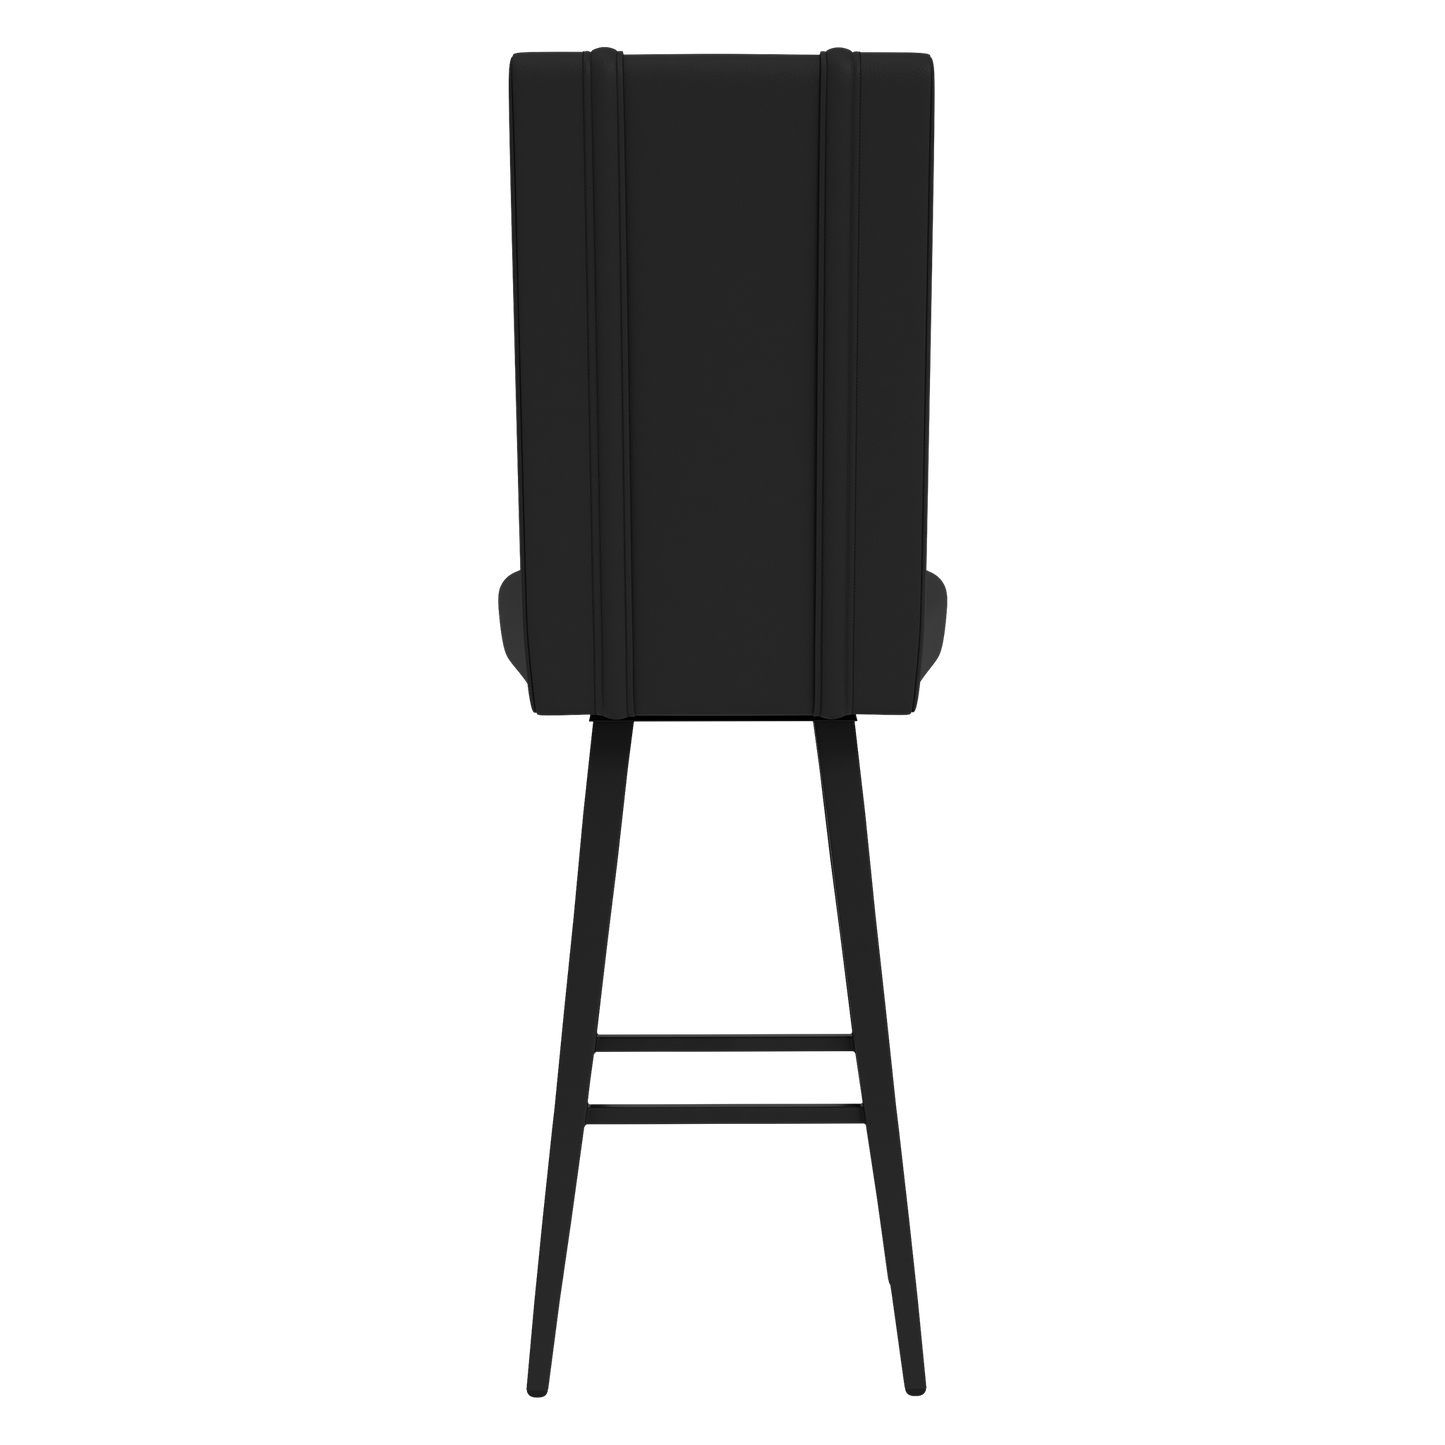 Swivel Bar Stool 2000 with Indianapolis Colts Classic Logo